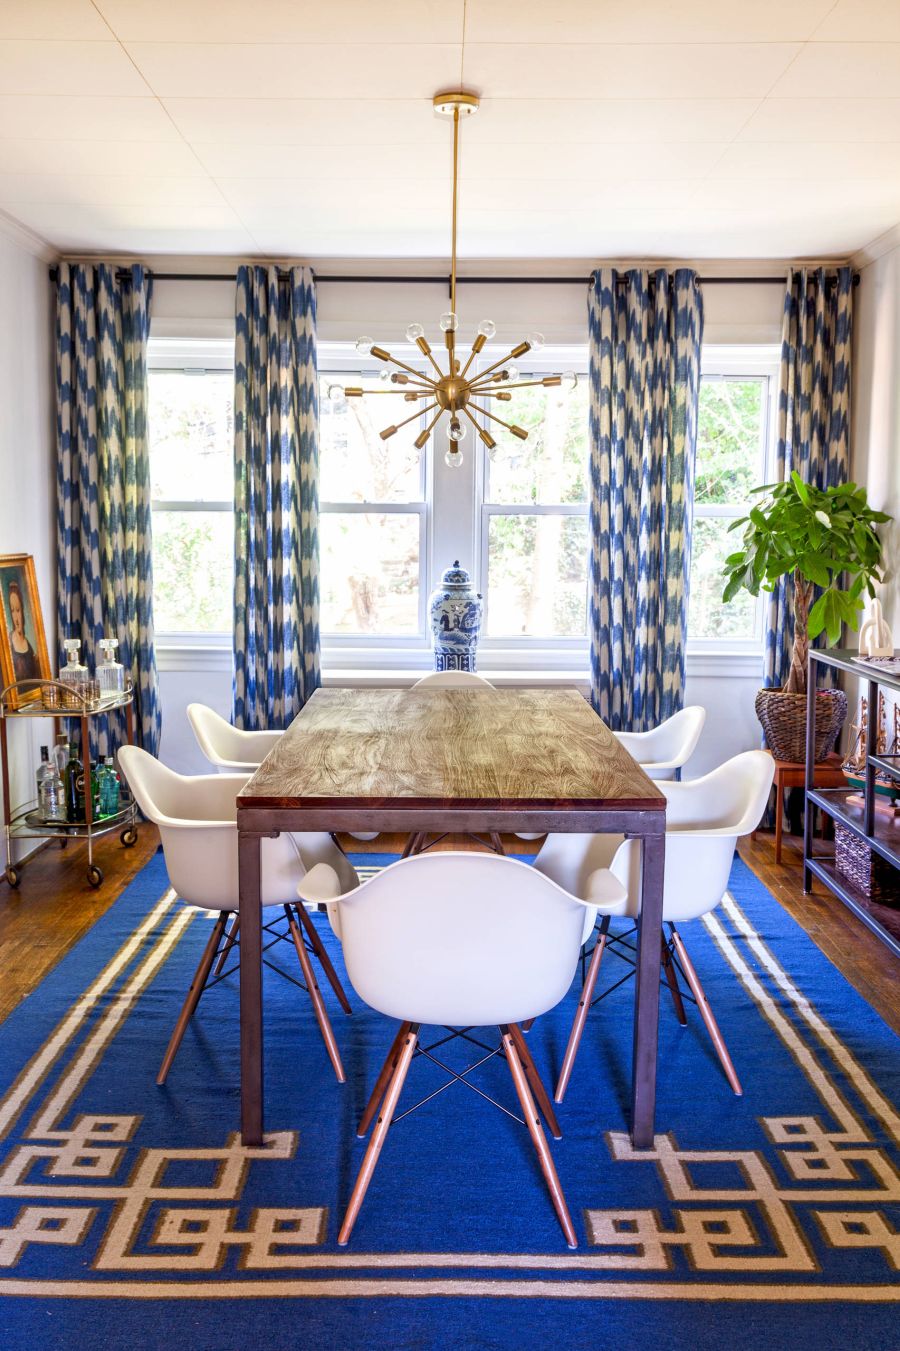 Carpet-and-drapes-add-additional-pops-of-blue-to-the-dining-room-18310